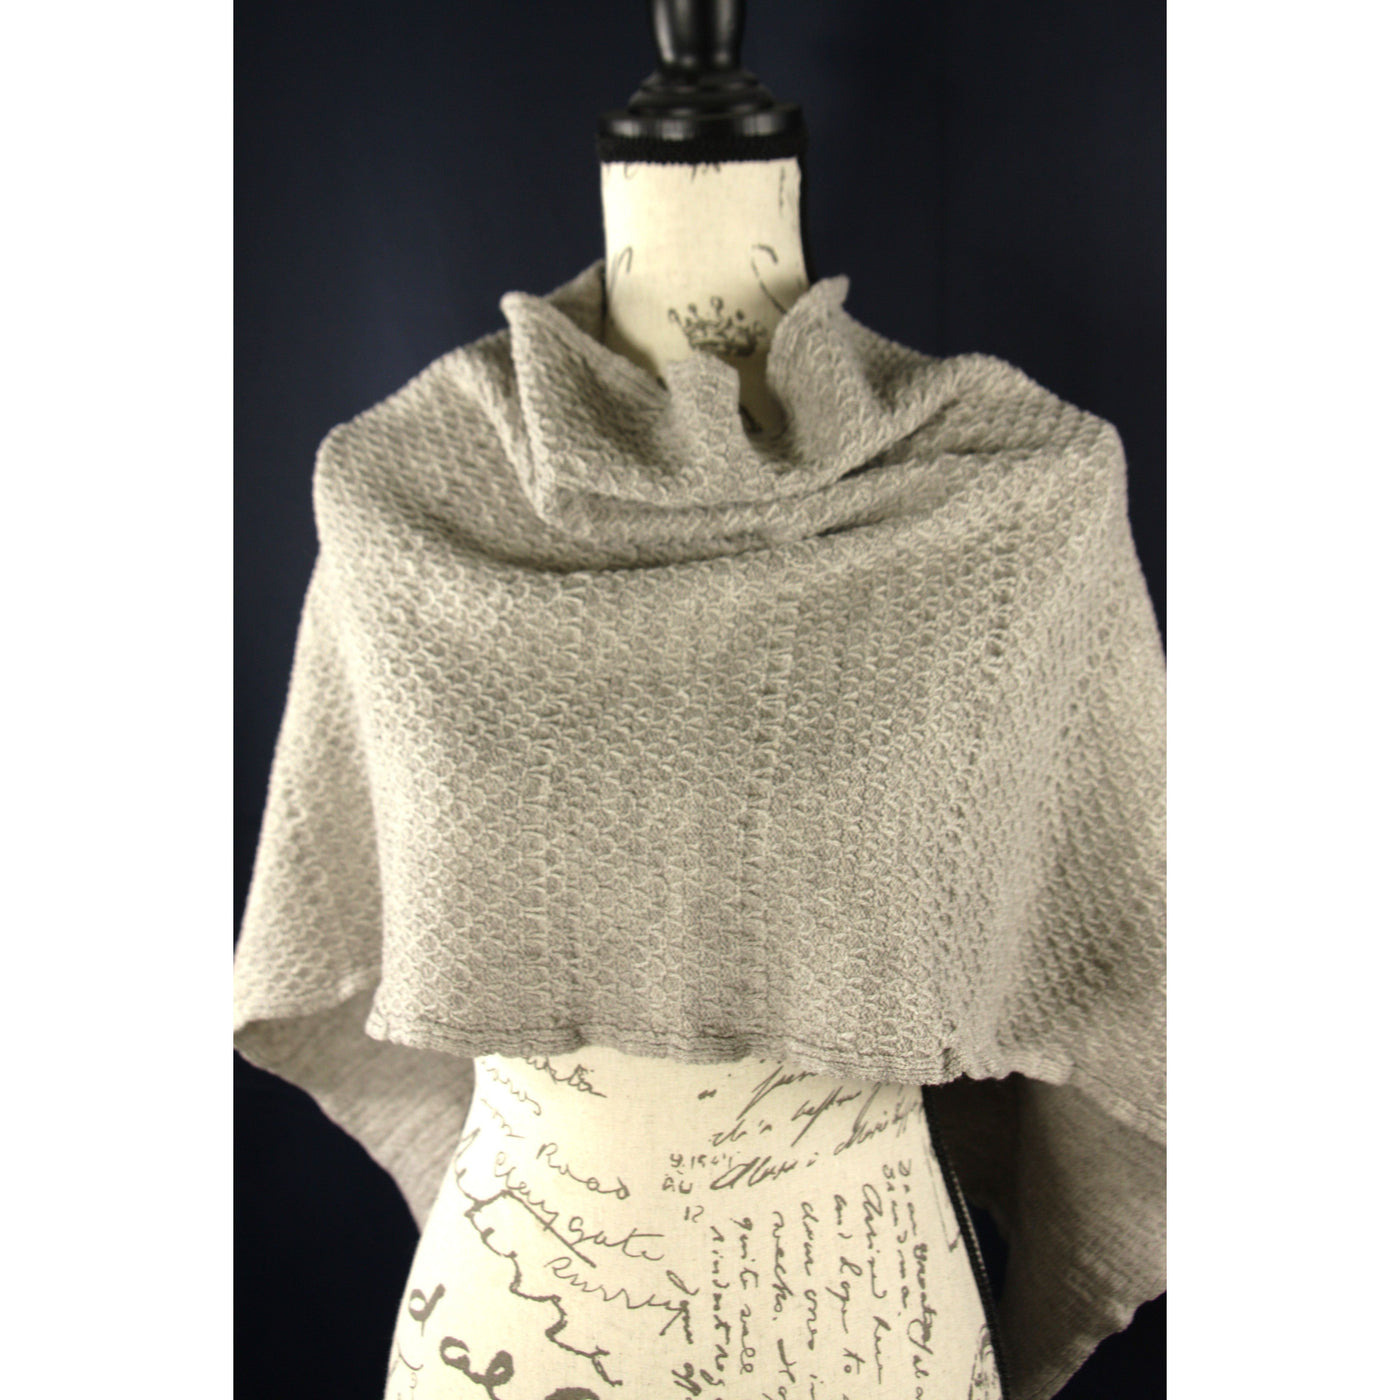 Our "Nellie" Poncho